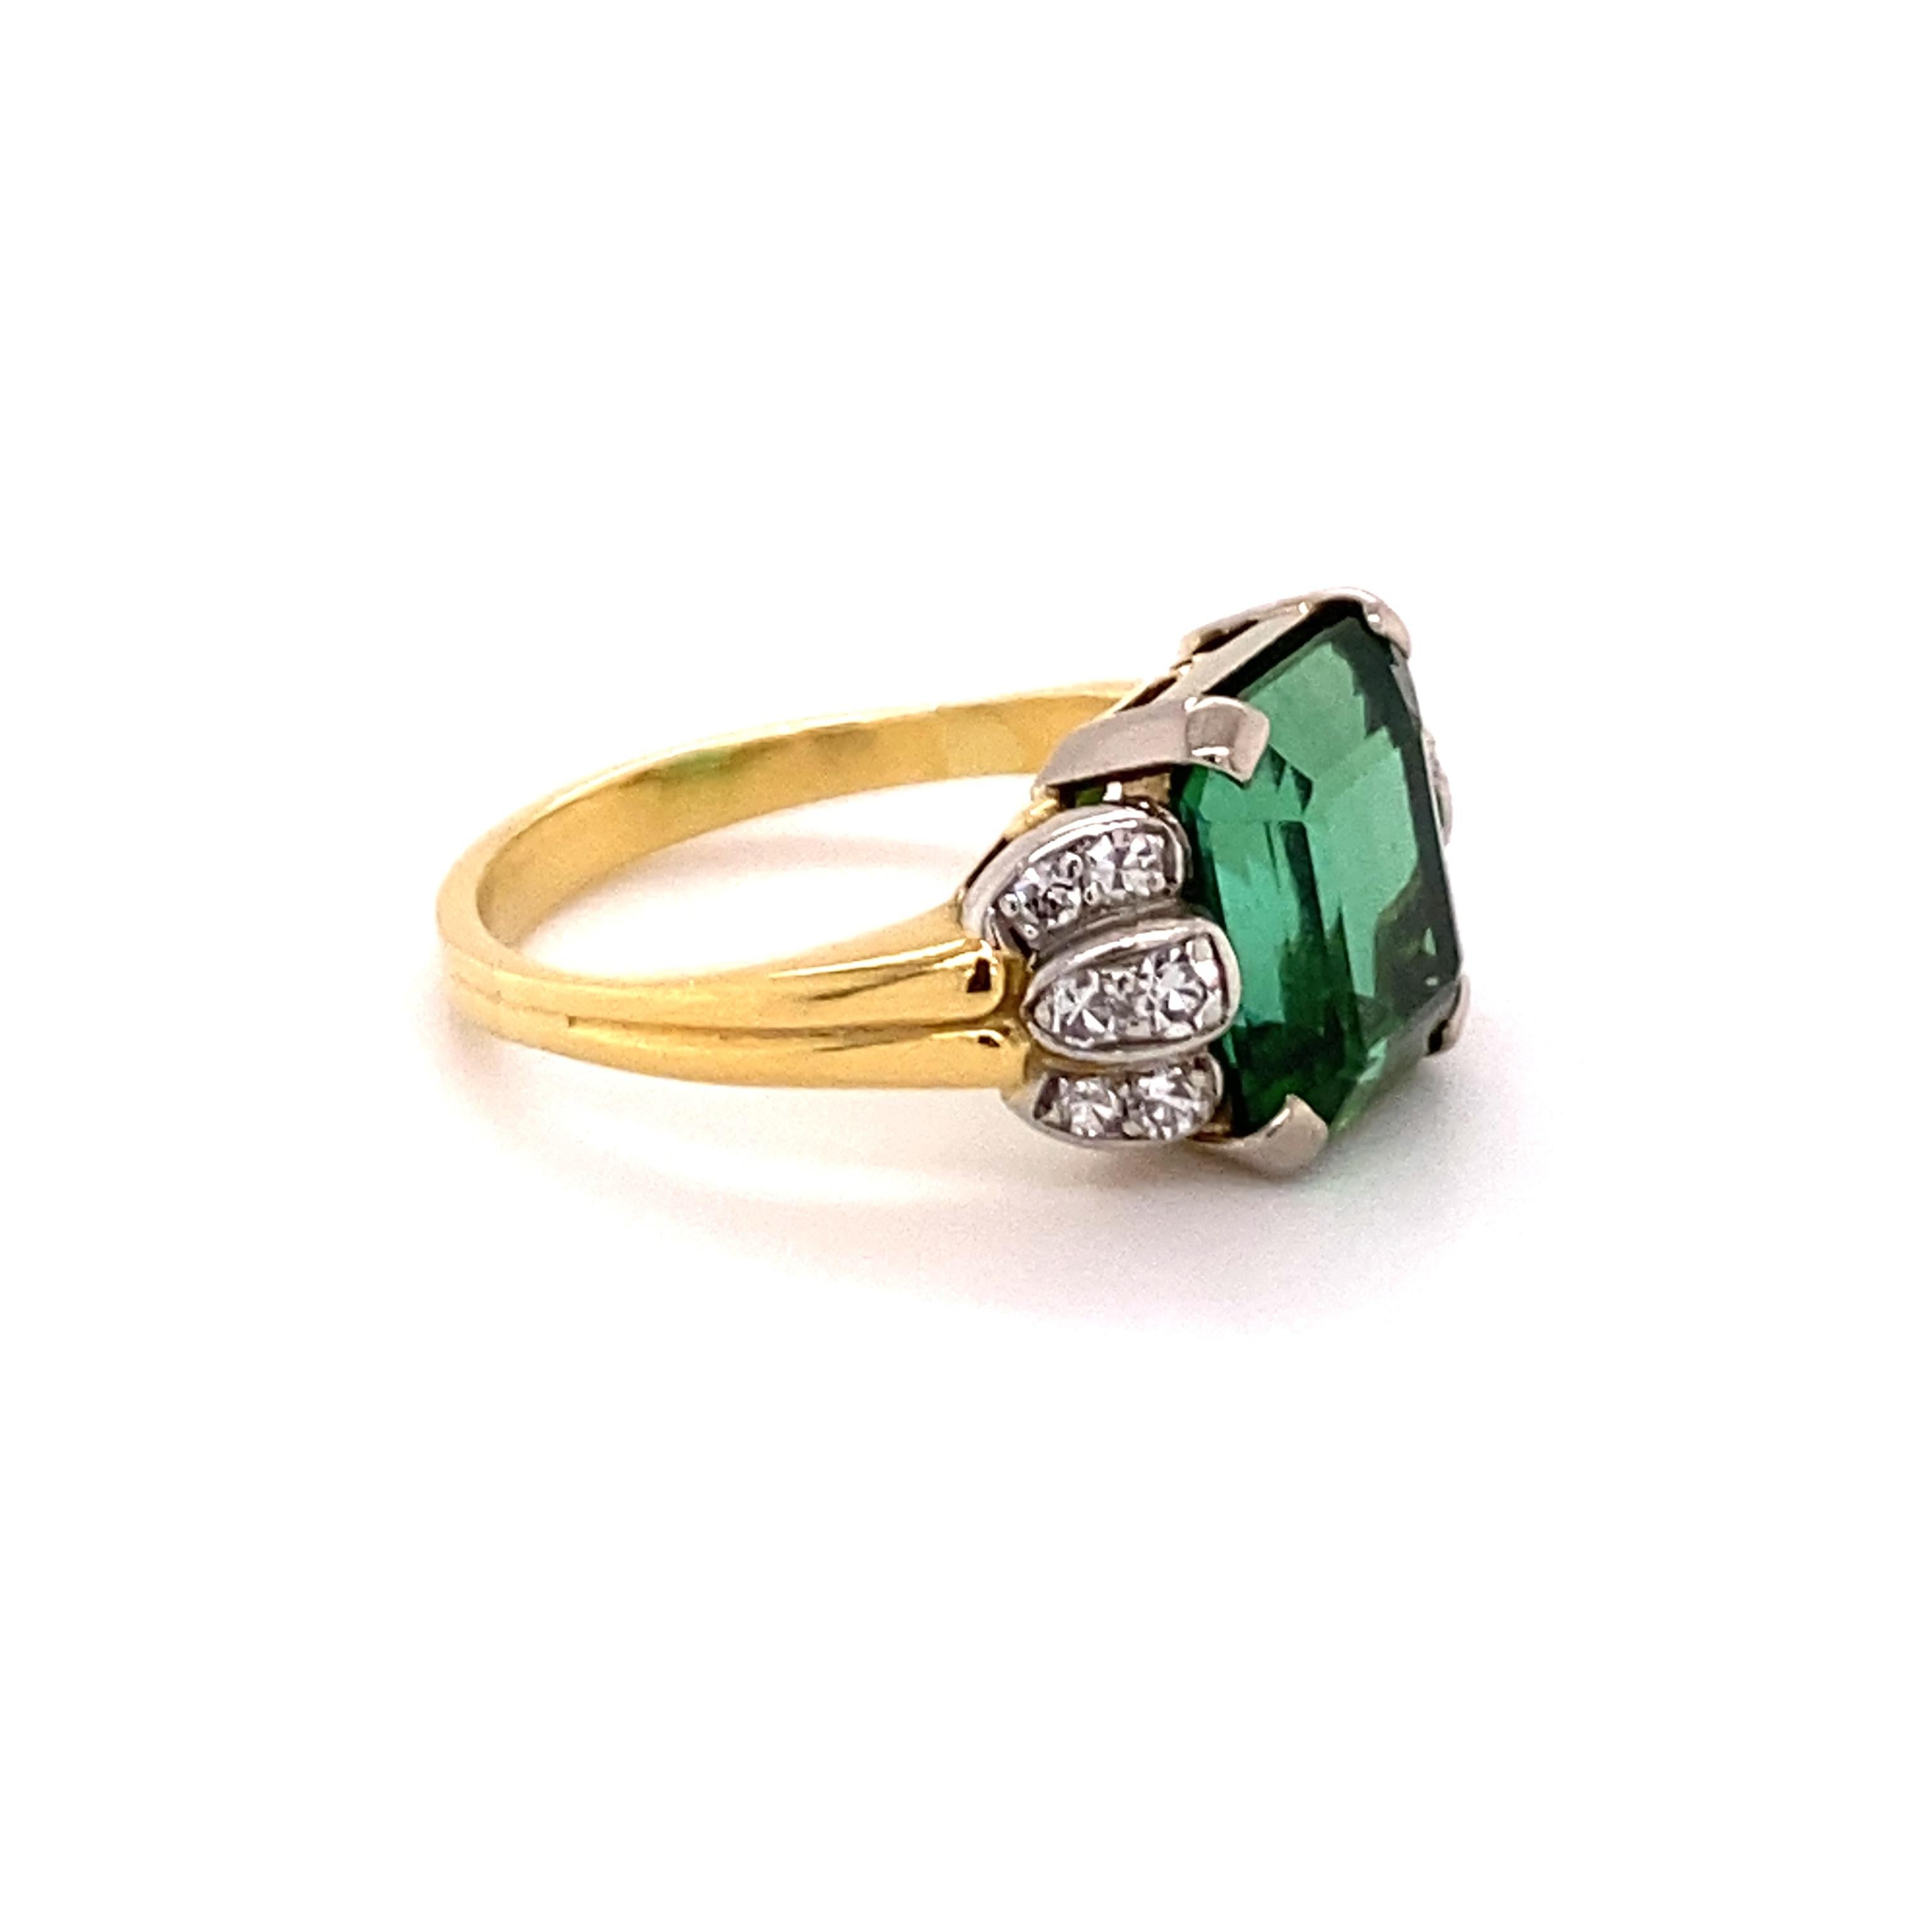 Emerald Cut Tourmaline and Diamond Ring in 18 Karat Yellow Gold and White Gold